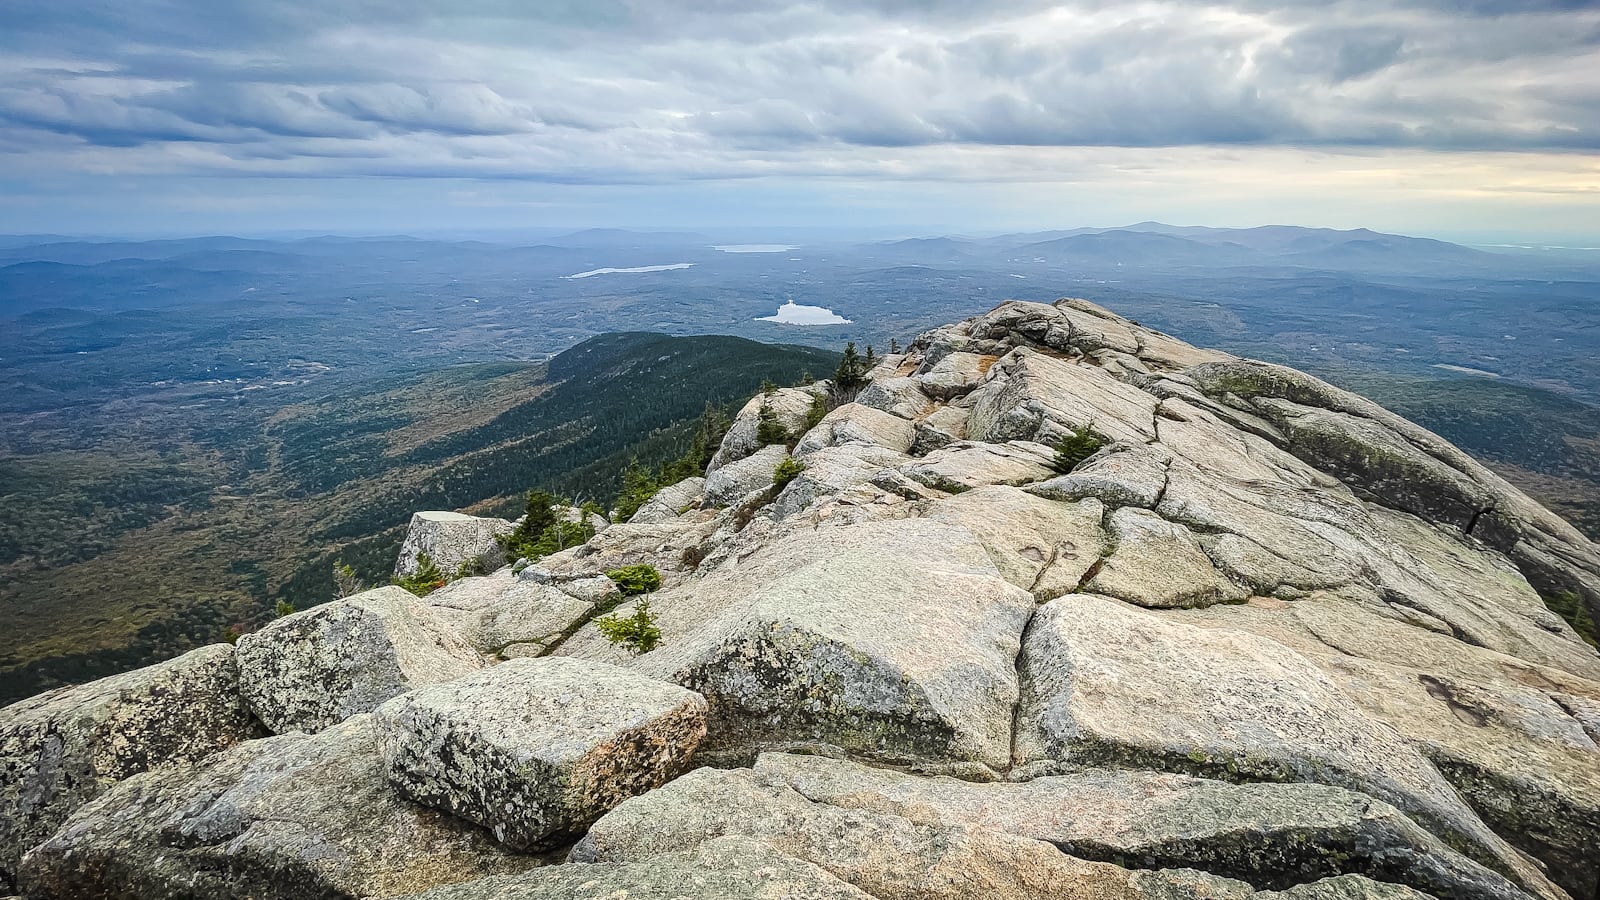 View of the summit of Mount Chocorua in the White Mountains of New Hampshire